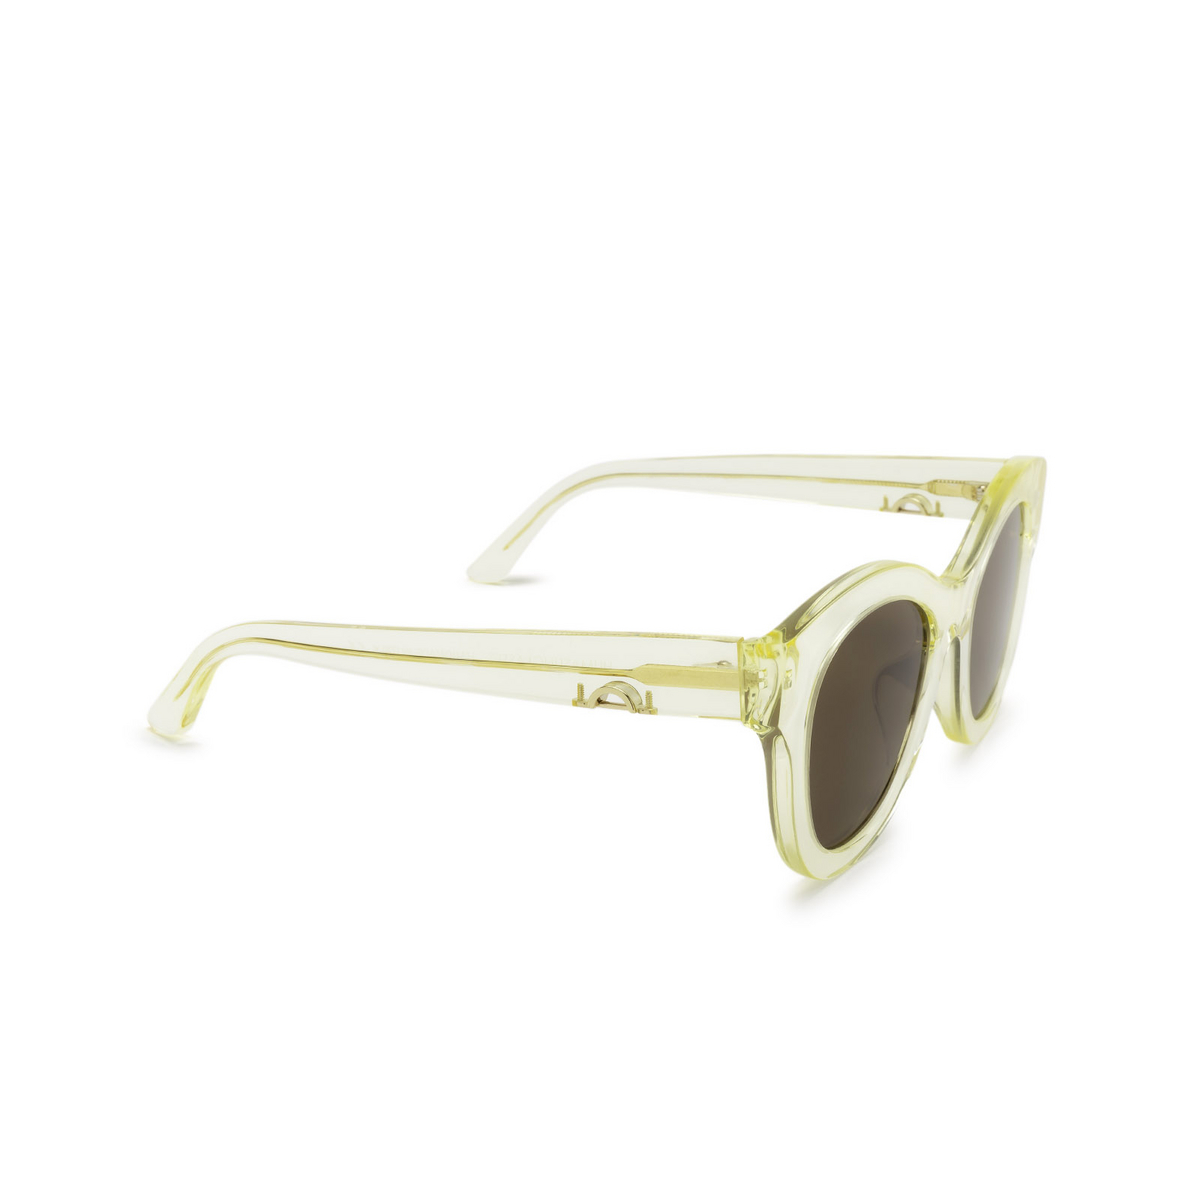 Huma® Butterfly Sunglasses: Cami color Champagne 02 - three-quarters view.